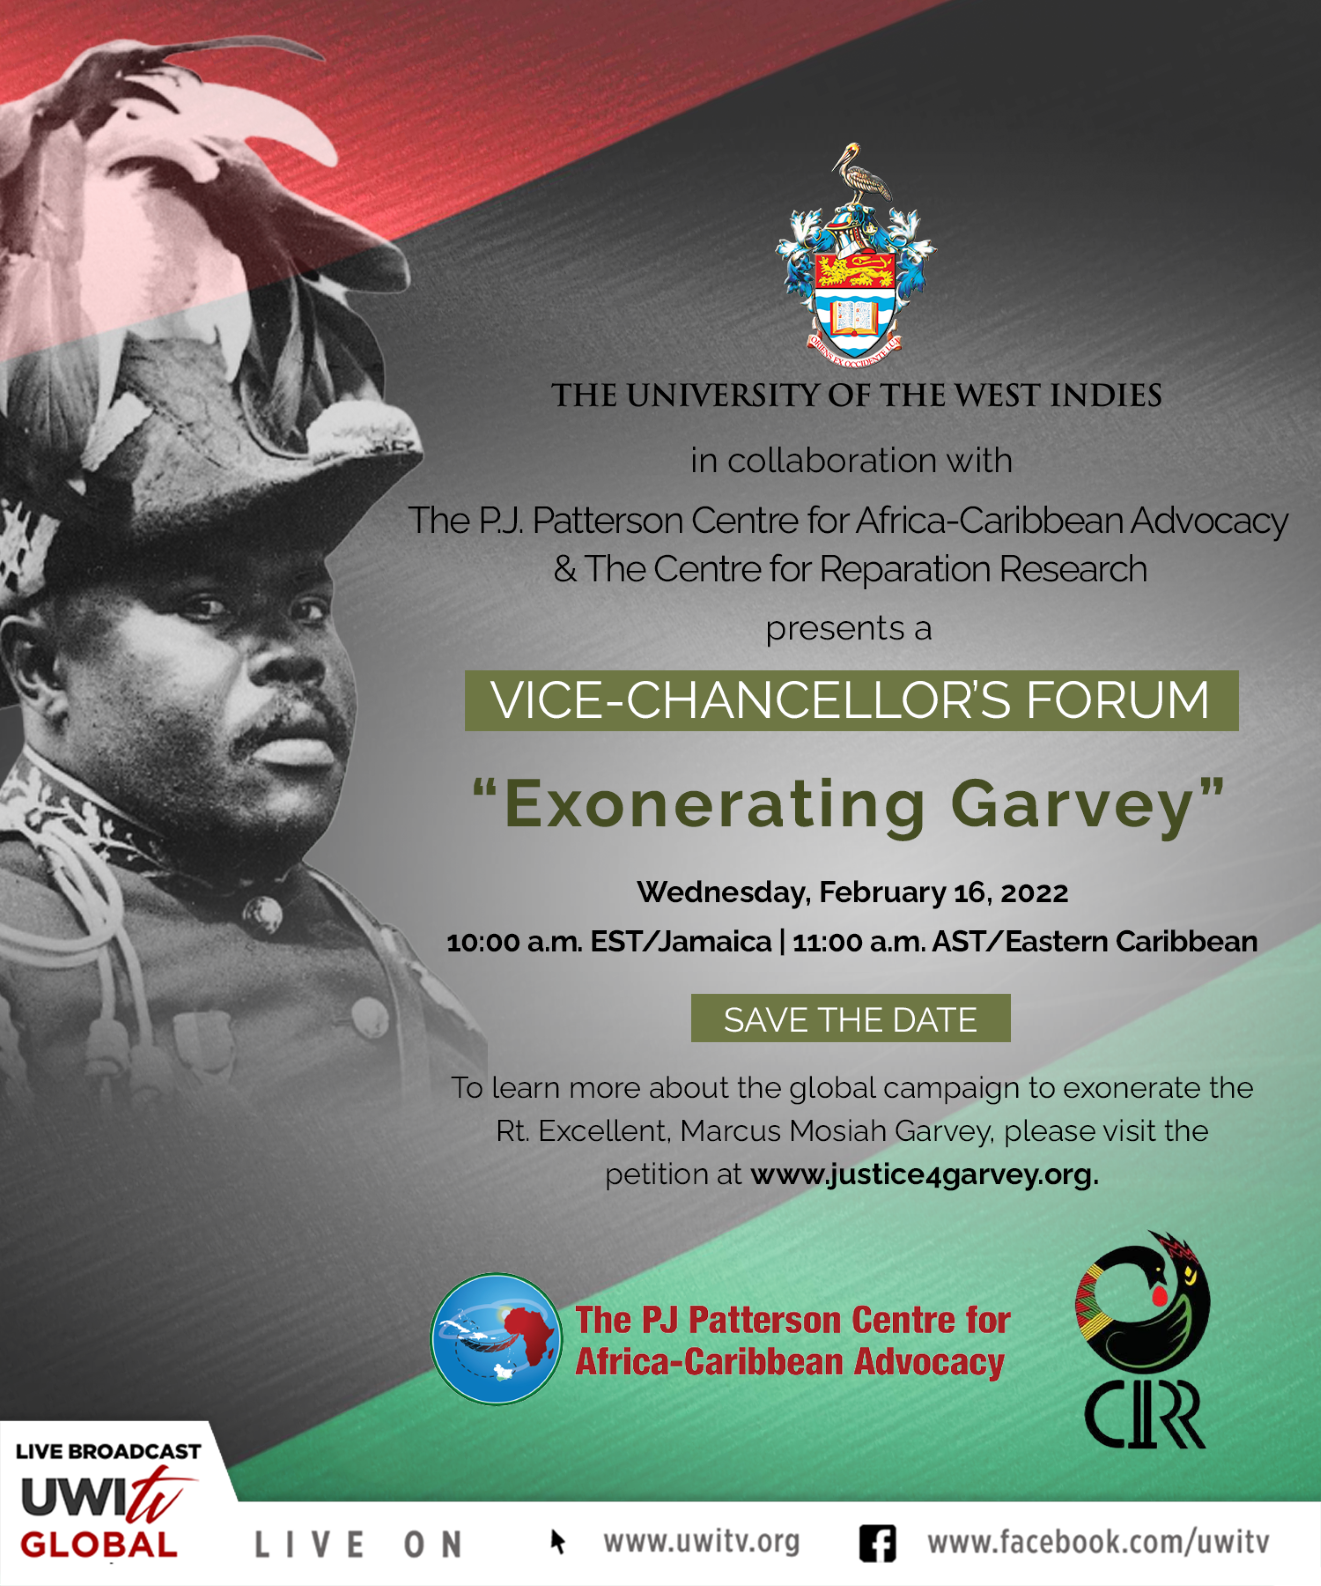 Campaign to exonerate Marcus Garvey moves into high gear